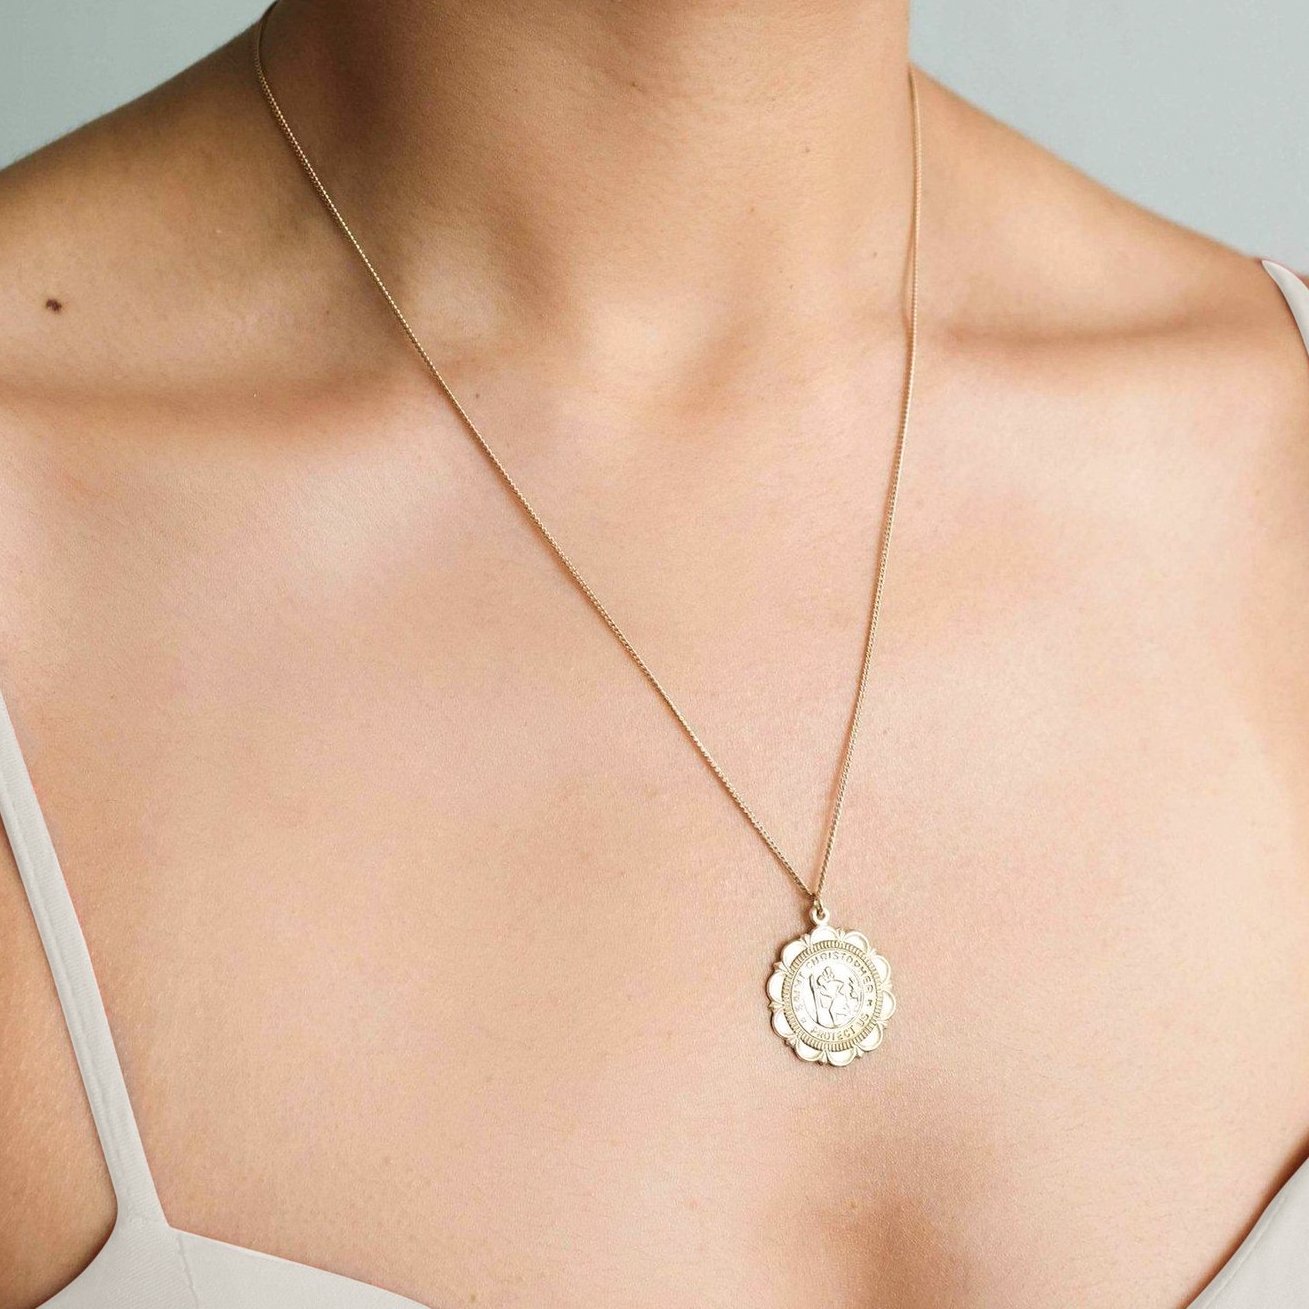 Traveler's Coin Necklace by Simple & Dainty Jewelry